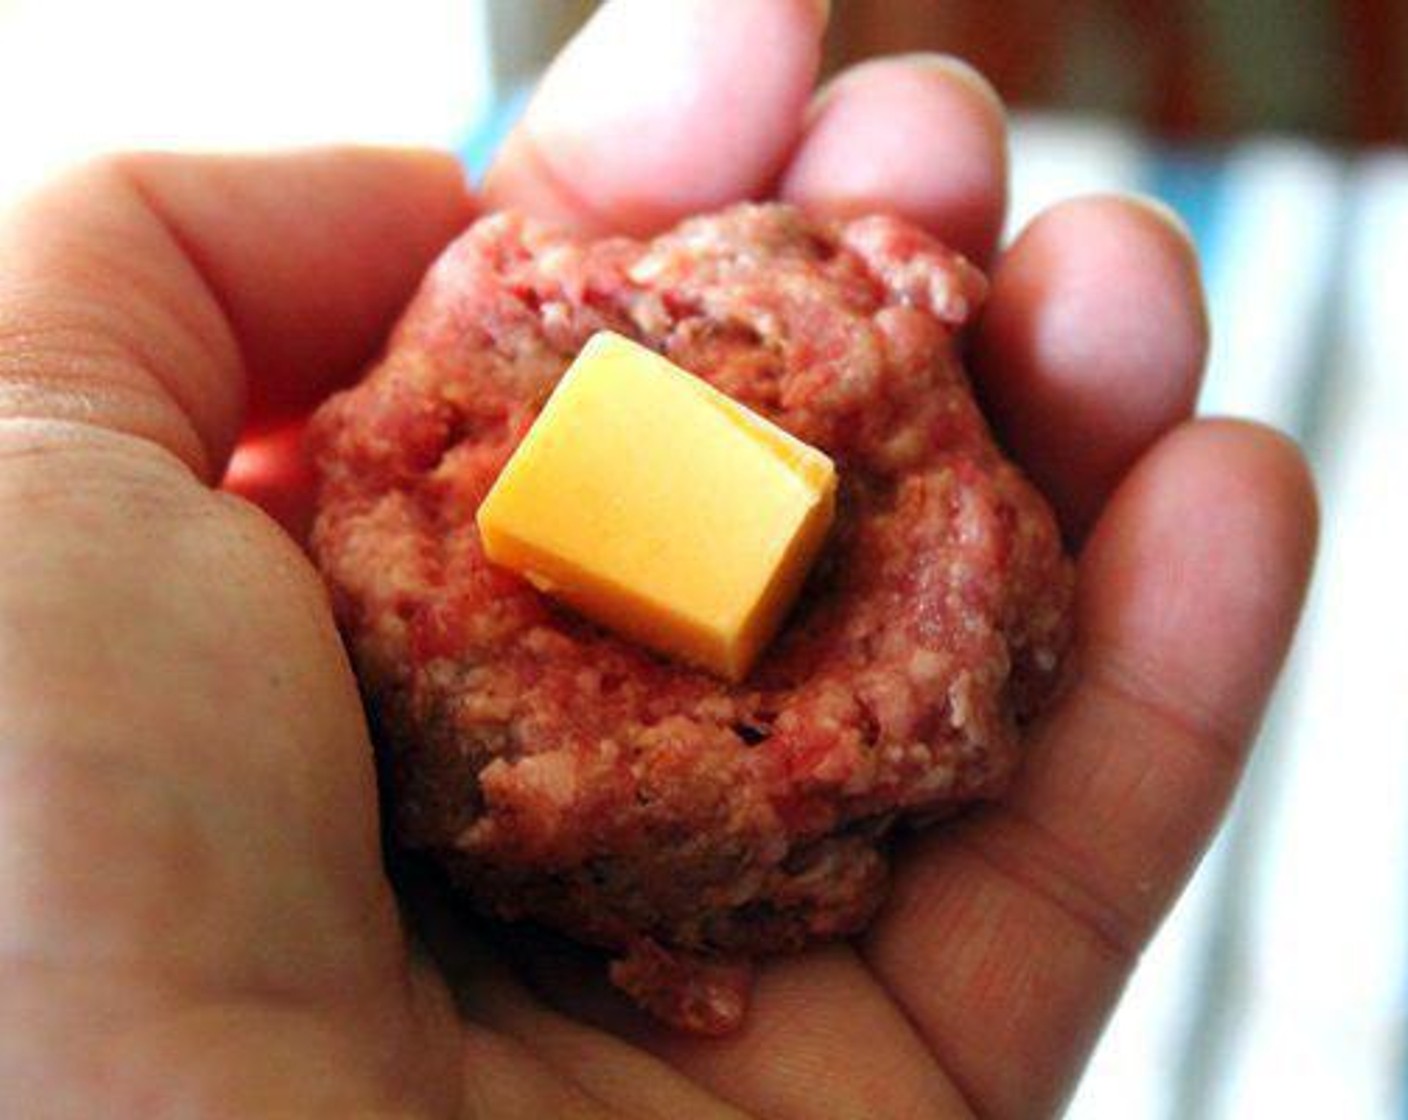 step 5 Evenly roll a section of the meat mixture into an approximately 1-inch sized meatball. Press 1 cube of cheese into the center. Gently form the meat around the cheese cube so it is in the center.